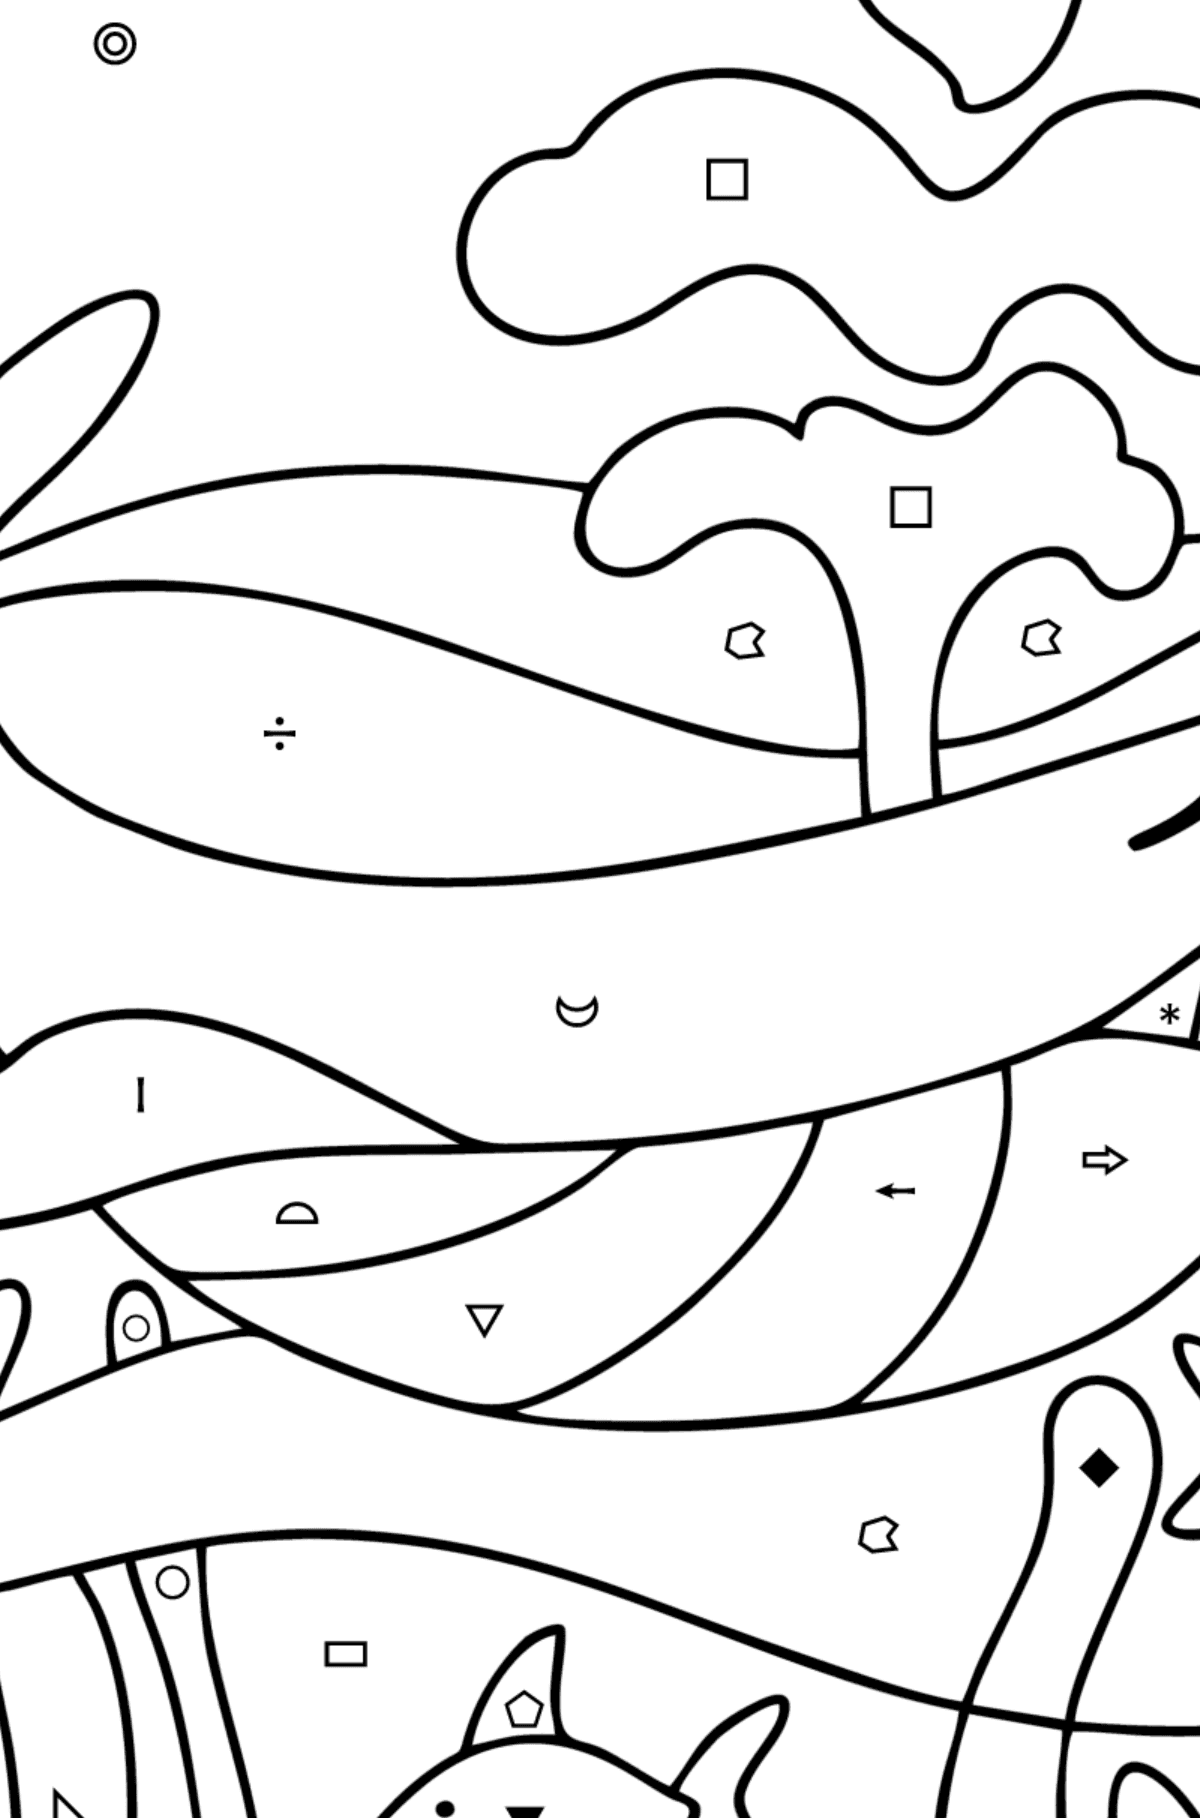 Cute sperm whale coloring page - Coloring by Symbols and Geometric Shapes for Kids